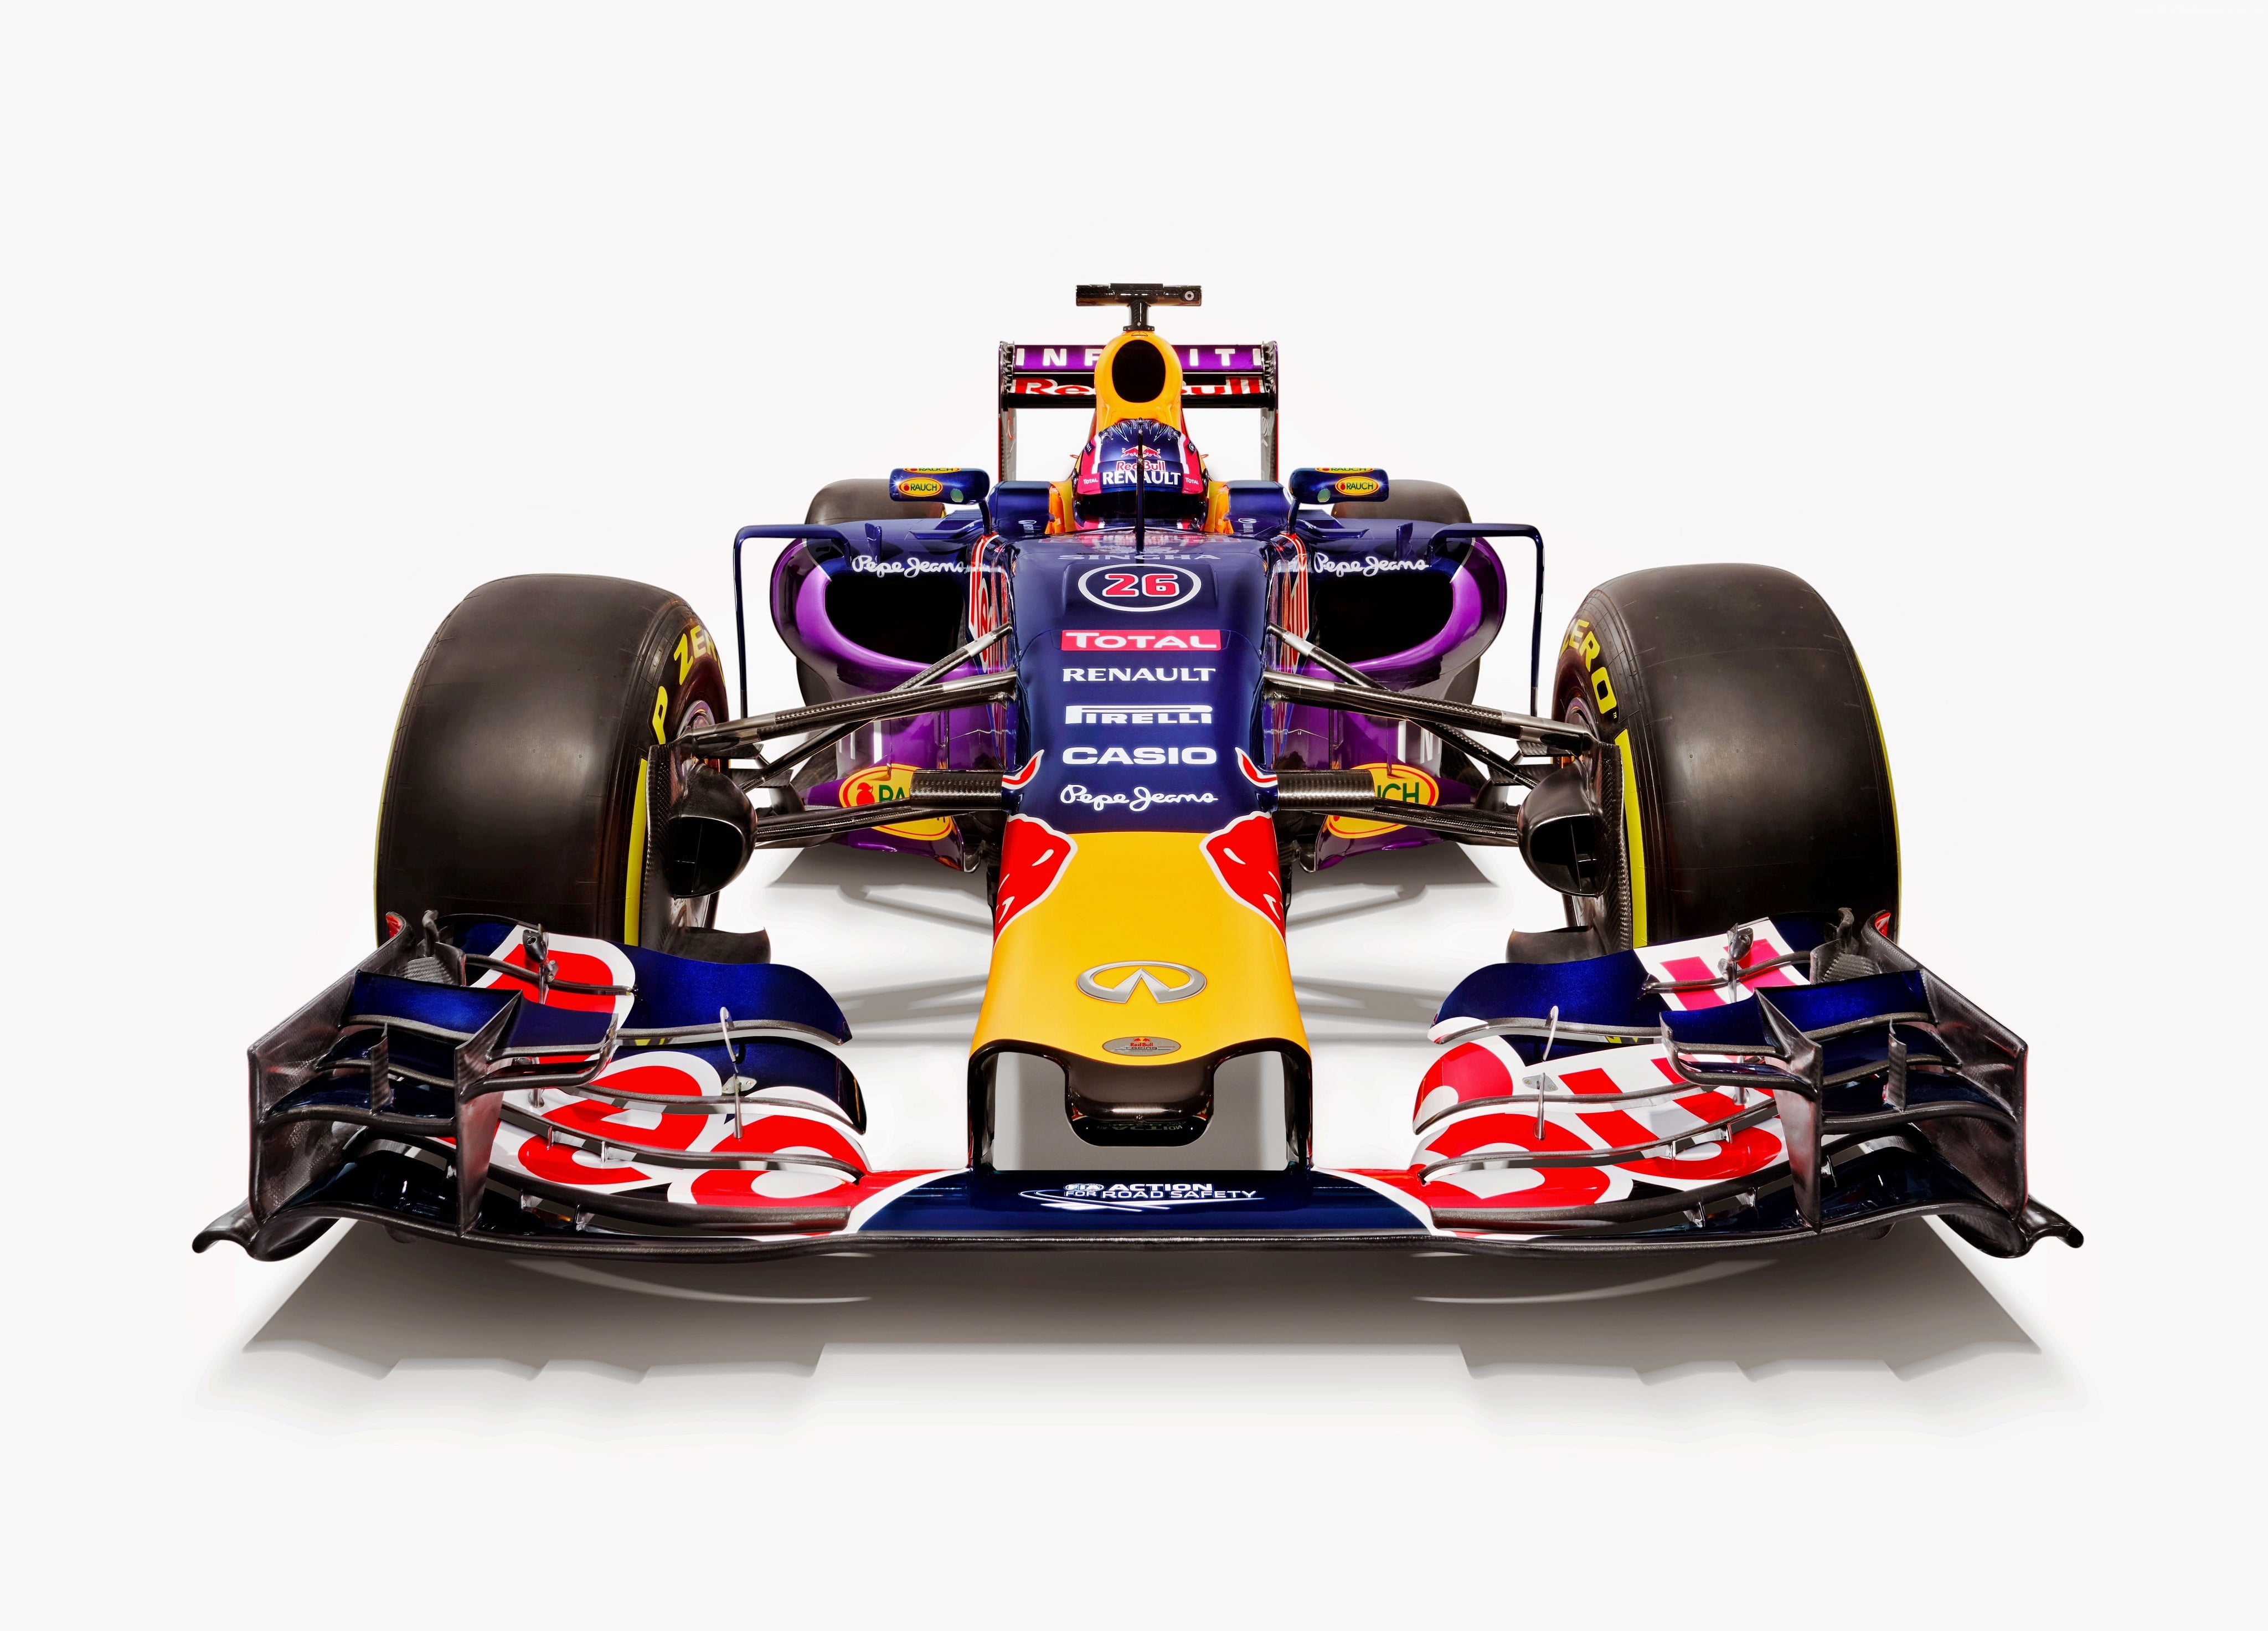 Blue Yellow And Red F1 Racing Car Hd Wallpaper Wallpaper Flare